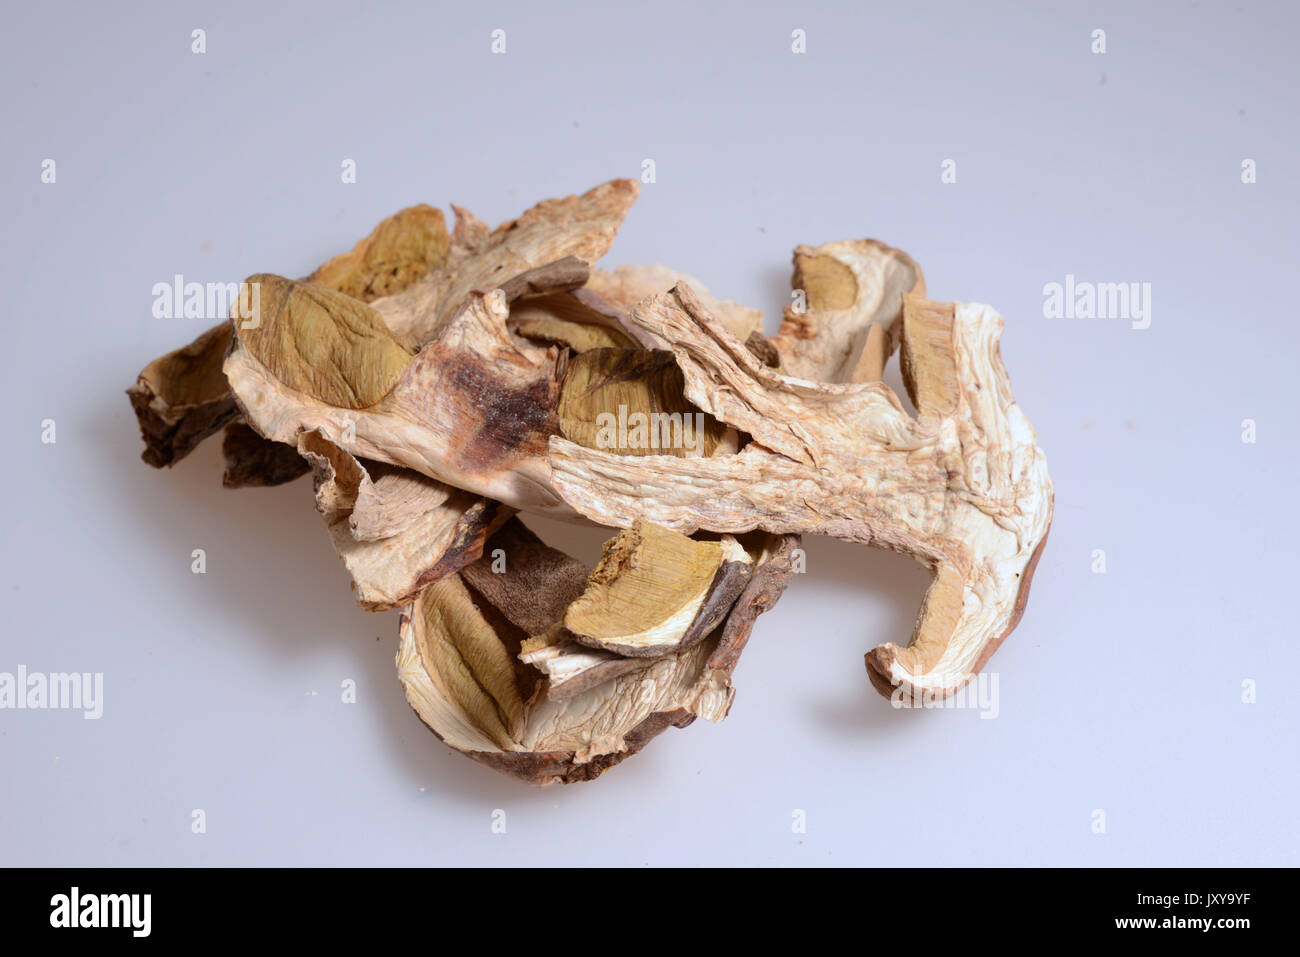 Saugues, production site of the company Borde SA, woodland mushrooms specialist. Heap of dried ceps / boletus mushrooms *** Local Caption *** . Stock Photo